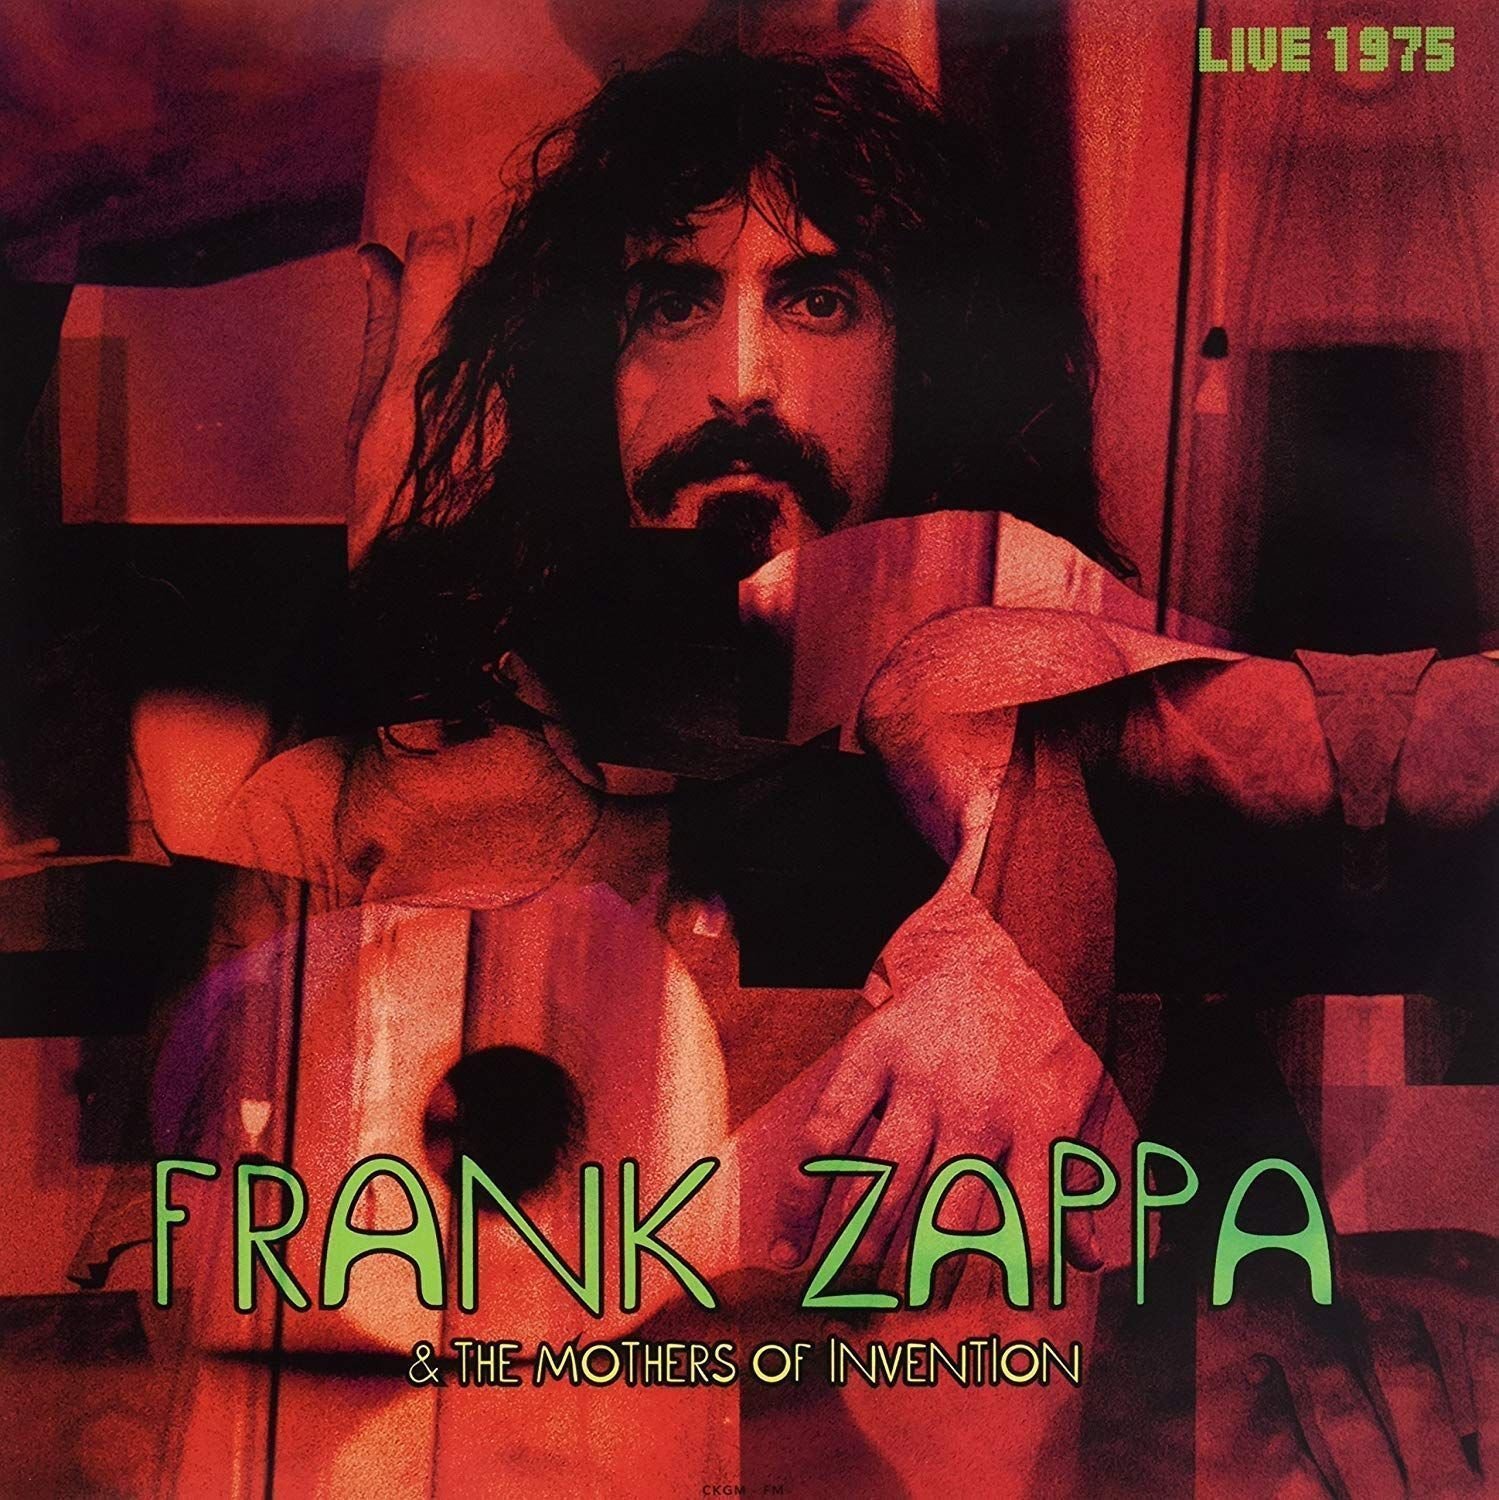 Vinyl Record Frank Zappa - Live 1975 (Frank Zappa & The Mothers Of Invention) (2 LP)